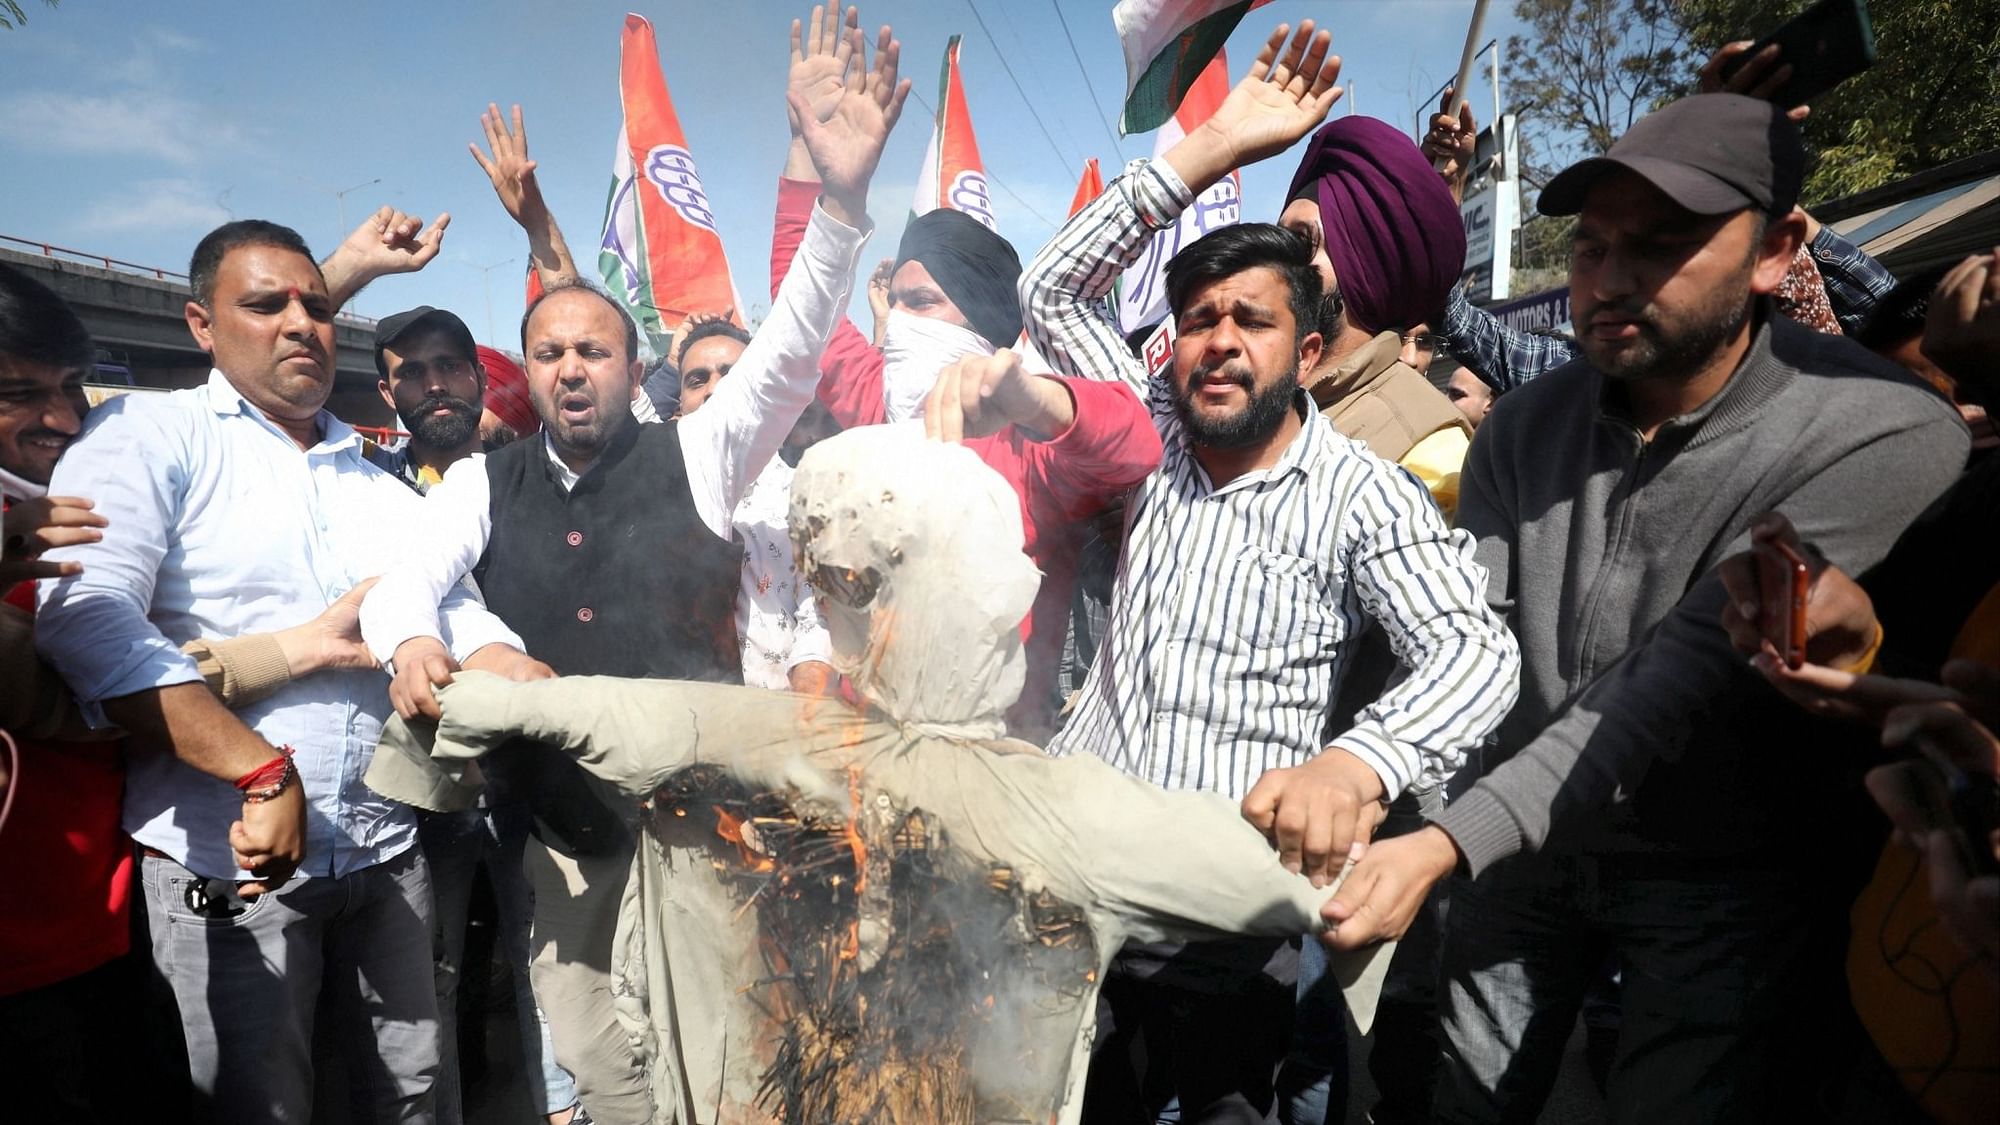 Congress activists burn an effigy of senior party leader Ghulam Nabi Azad during a protest, in Jammu, Tuesday, March 2, 2021.